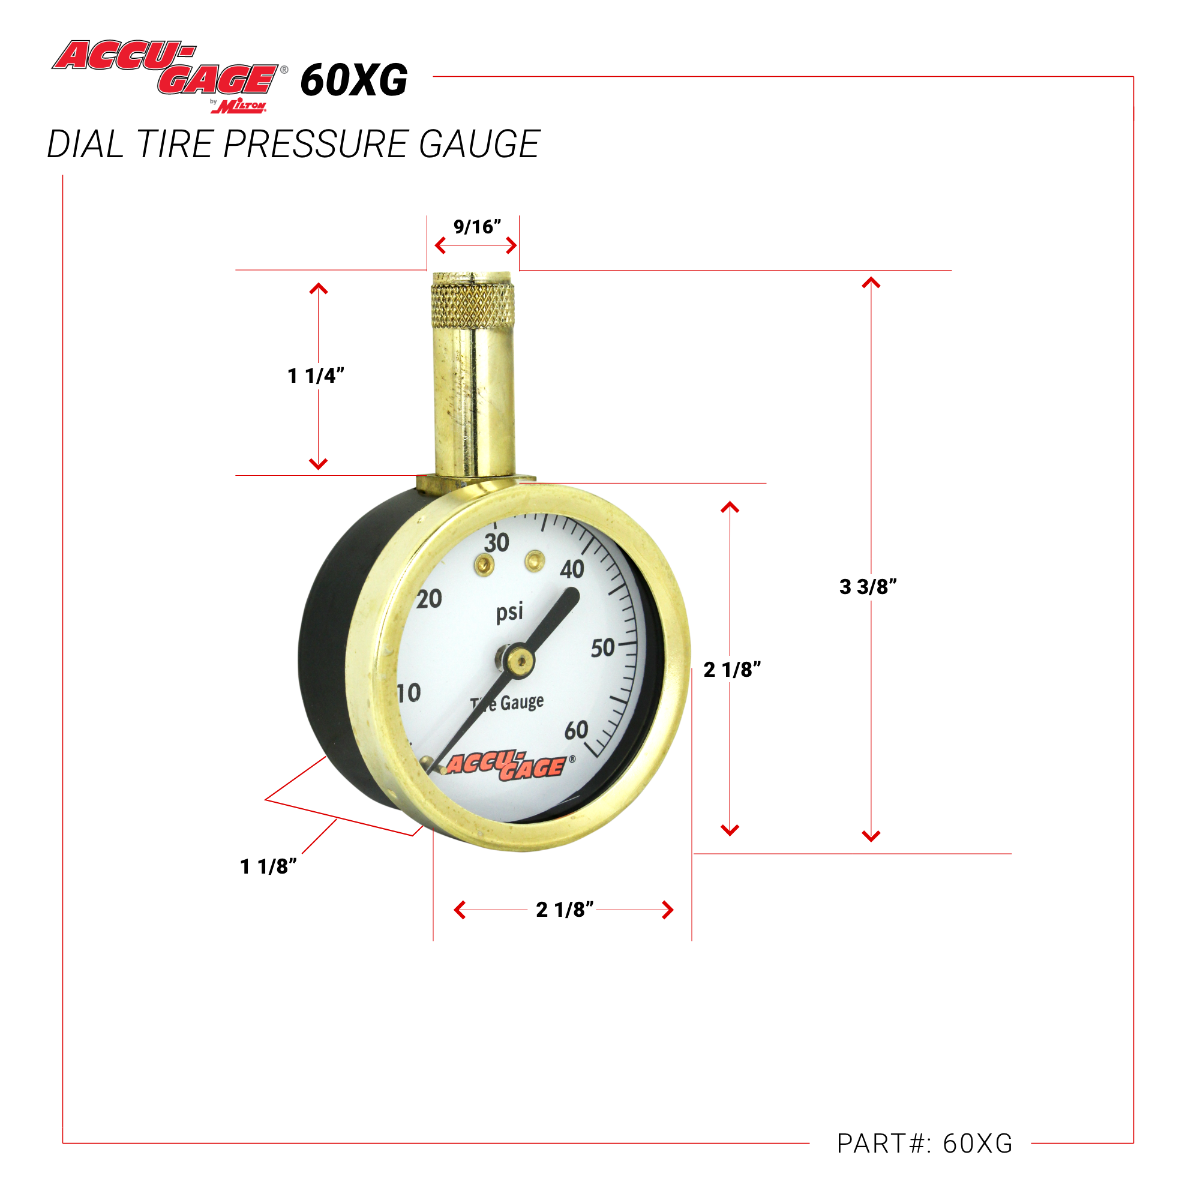 Accu-Gage by Milton Dial Tire Pressure Gauge with Straight Air